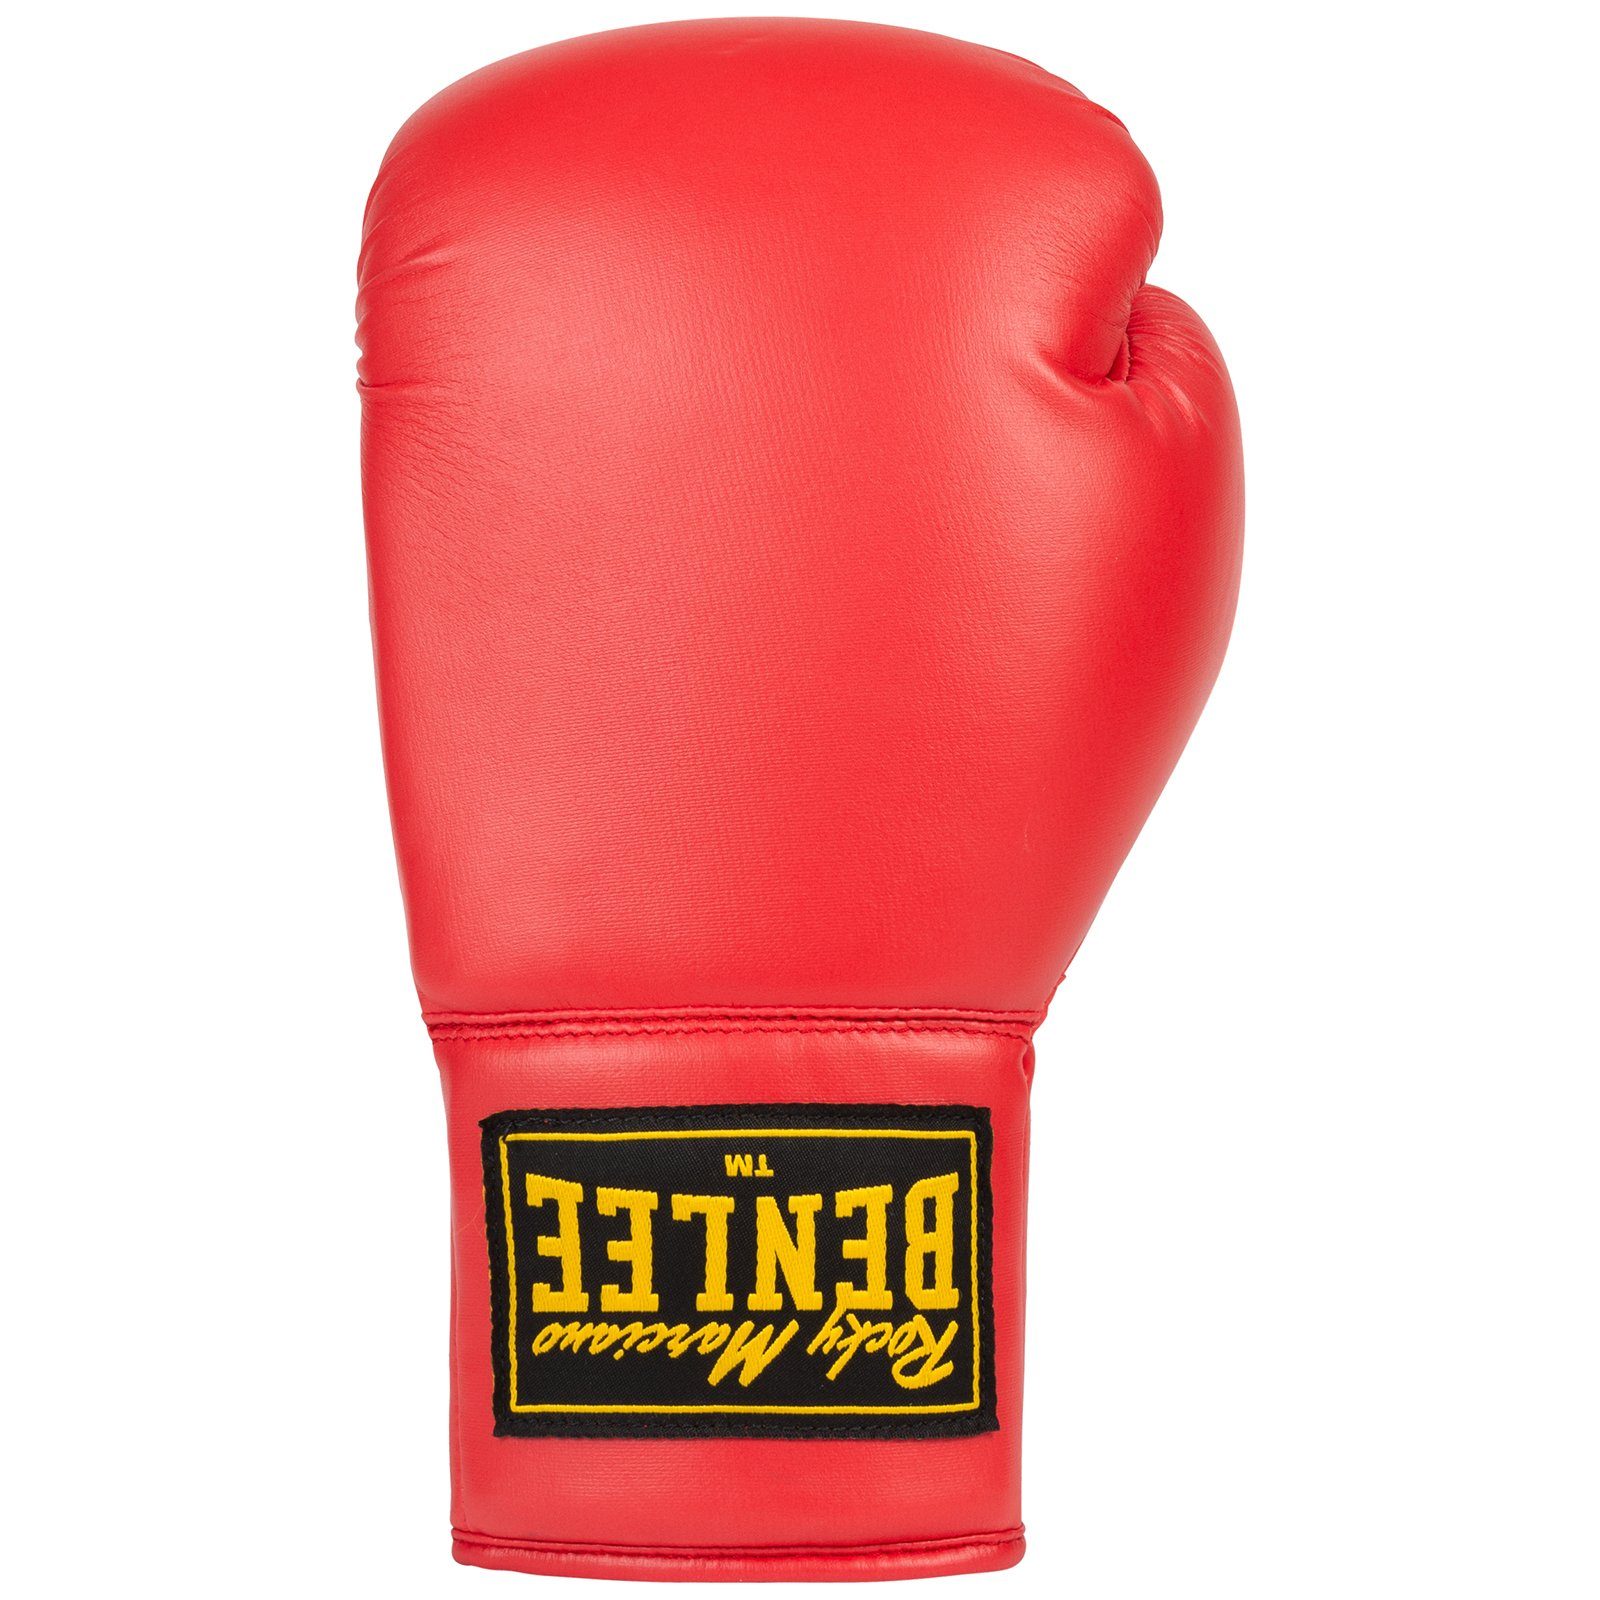 Benlee Rocky Marciano Boxhandschuhe AUTOGRAPH GLOVES Red